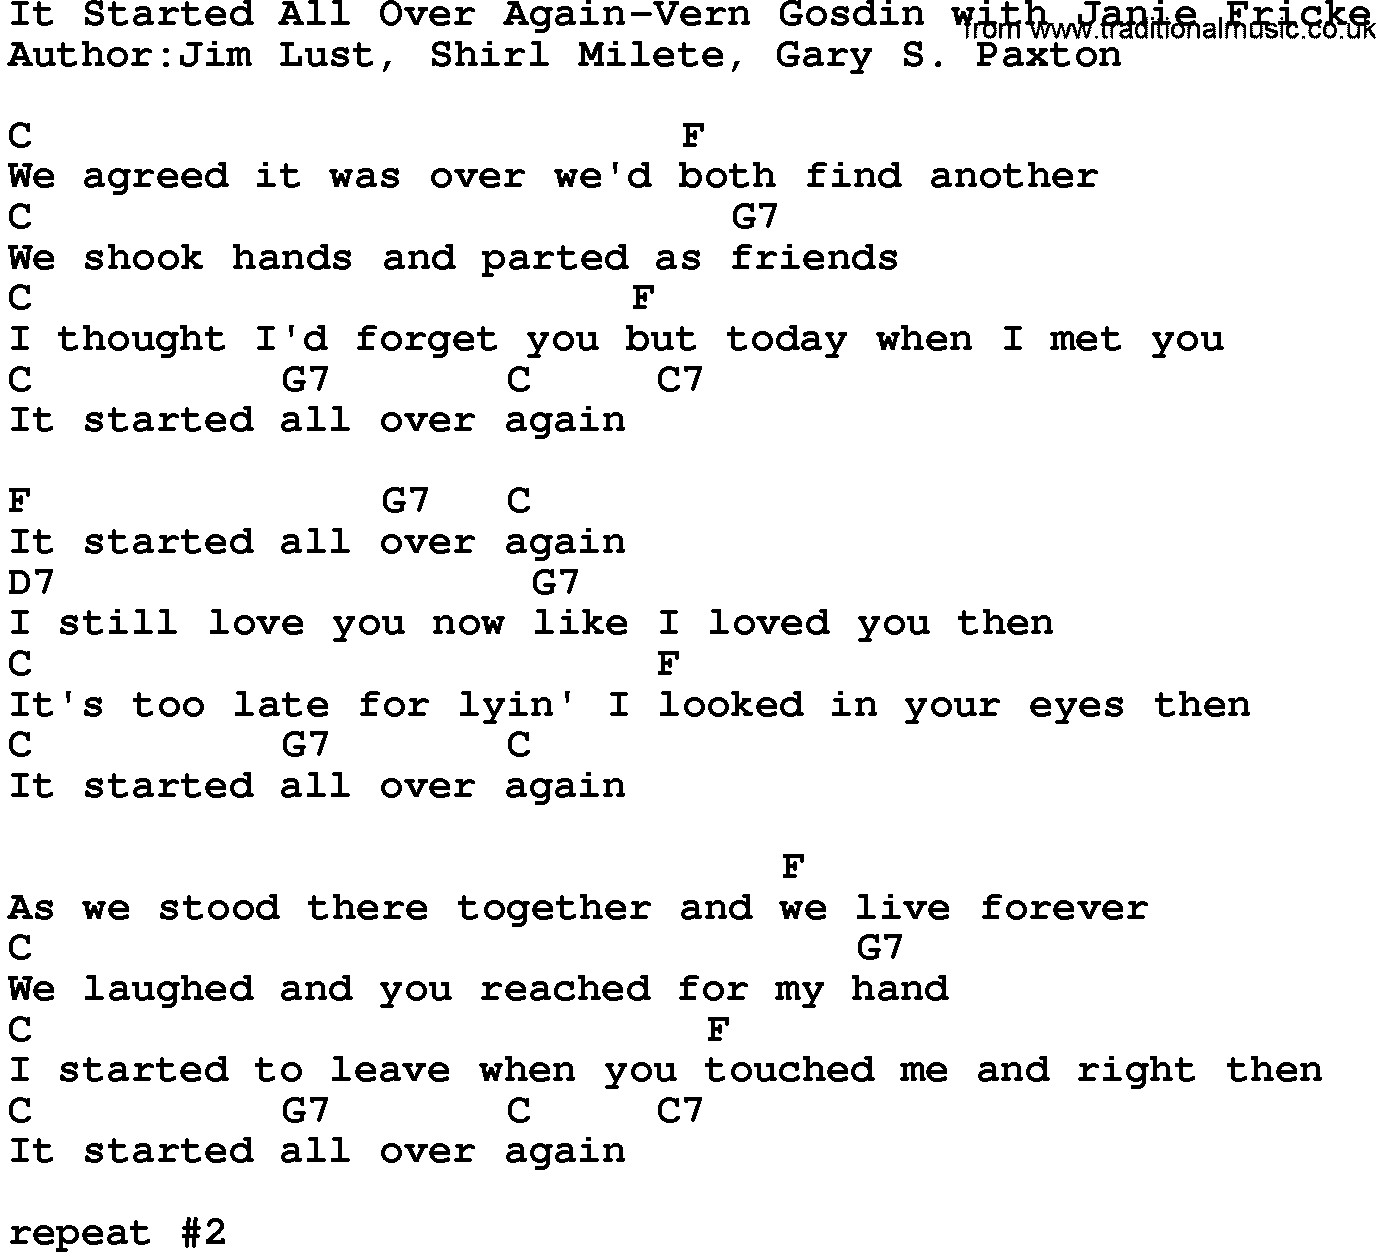 Country music song: It Started All Over Again-Vern Gosdin With Janie Fricke lyrics and chords